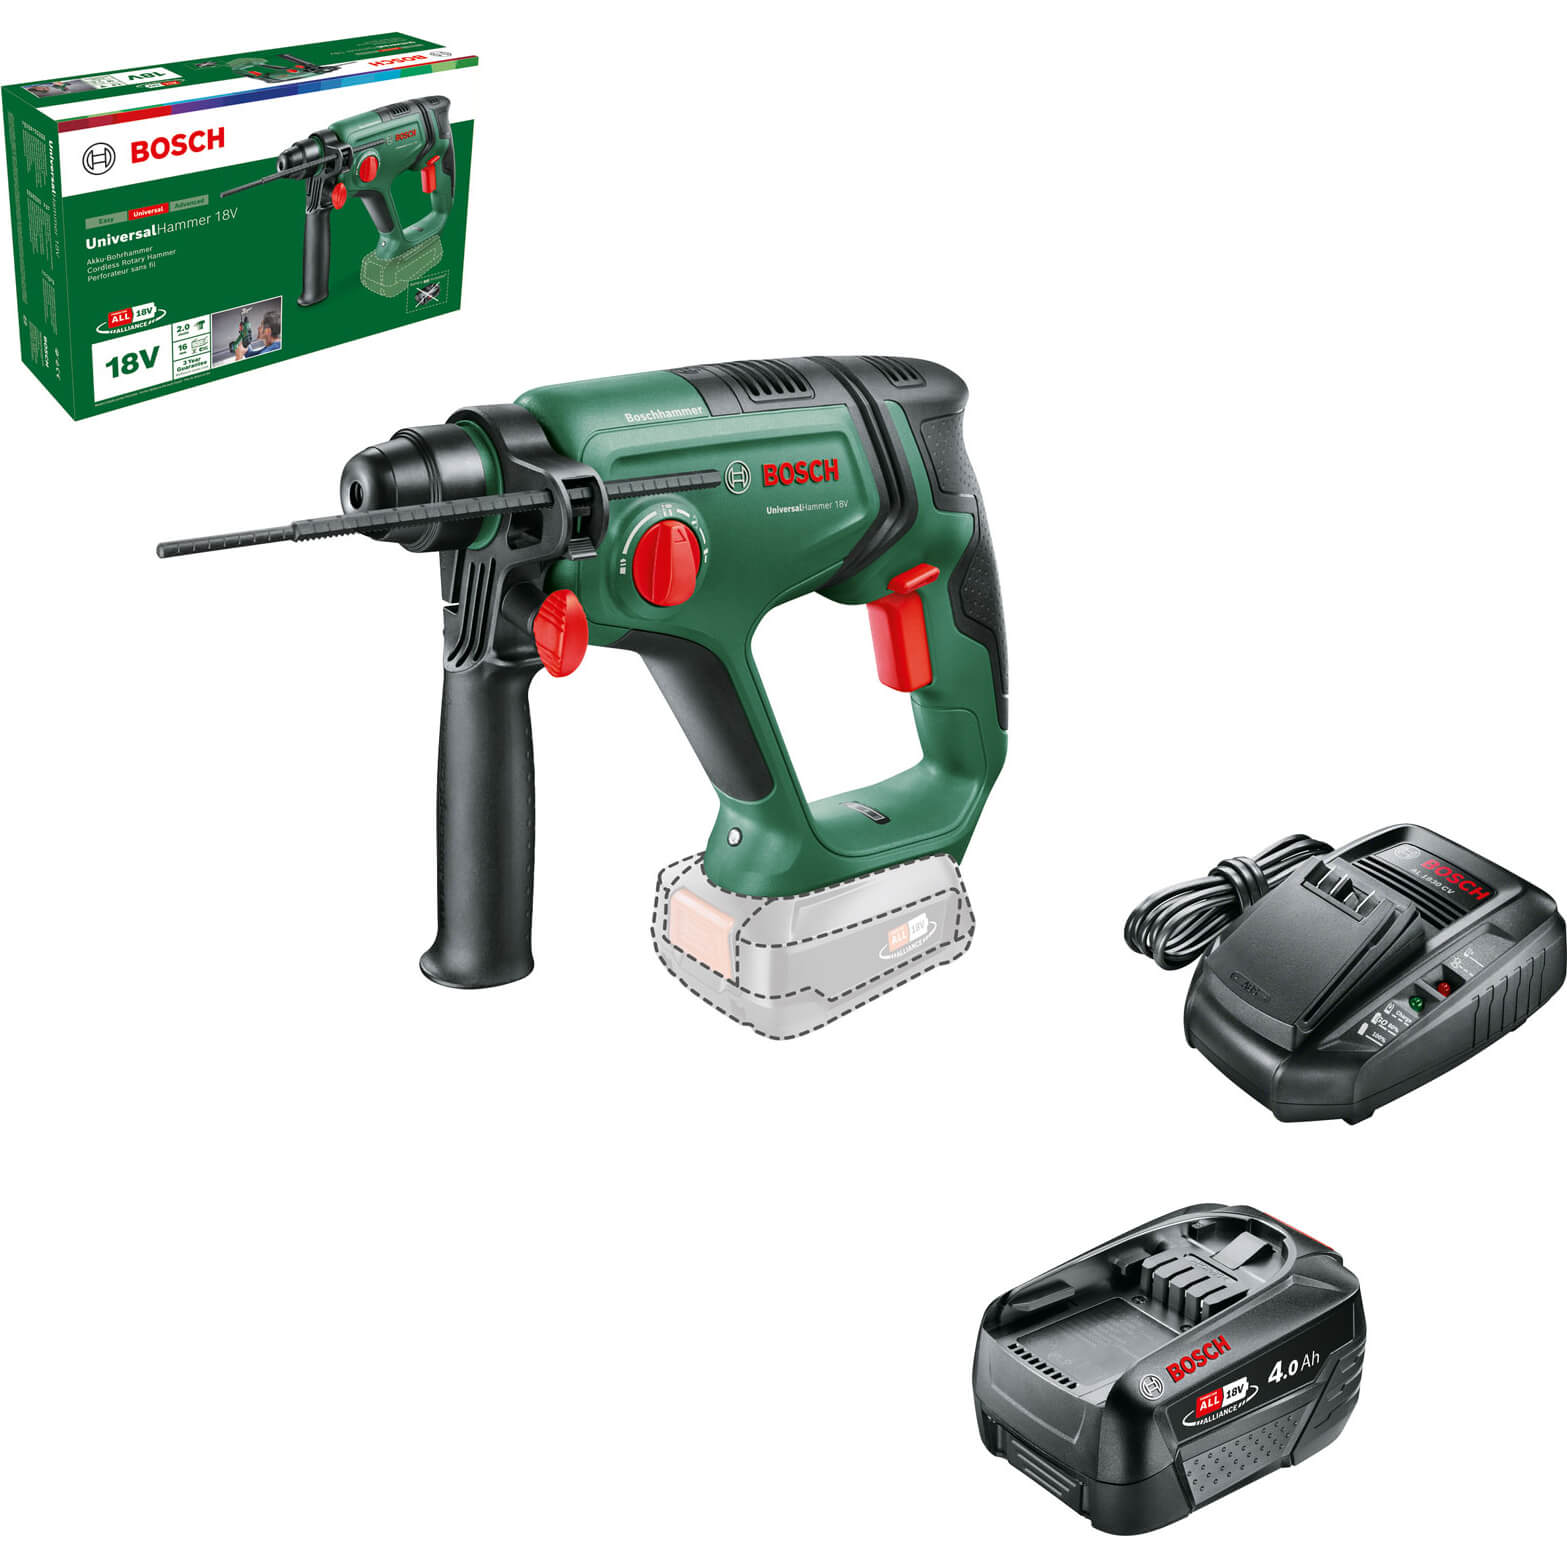 Image of Bosch UNIVERSALHAMMER 18v Cordless SDS Drill 1 x 4ah Li-ion Charger No Case